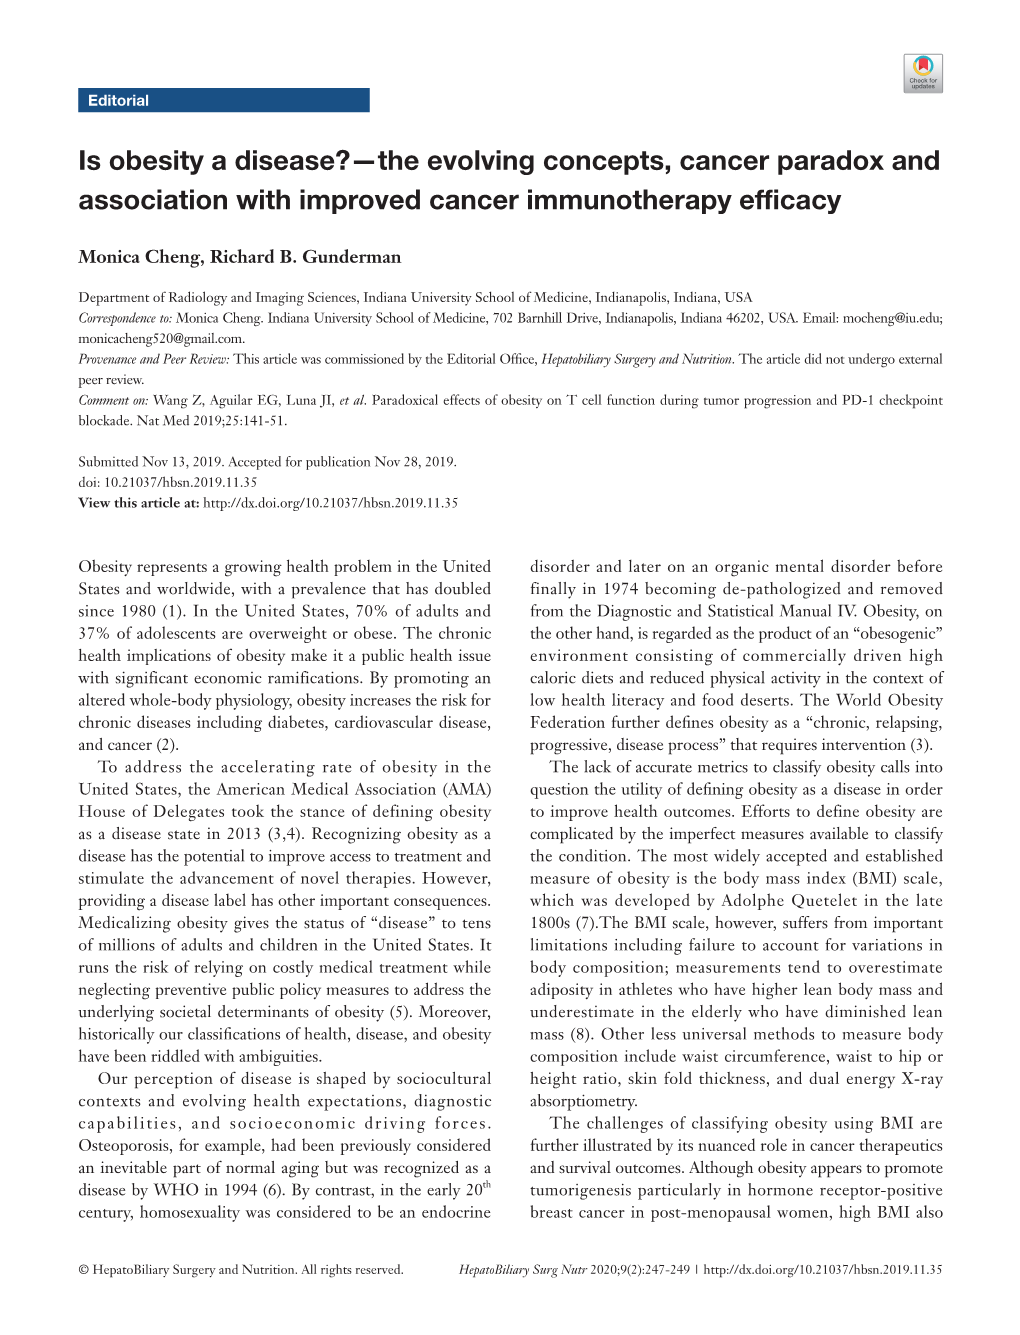 Is Obesity a Disease?—The Evolving Concepts, Cancer Paradox and Association with Improved Cancer Immunotherapy Efficacy